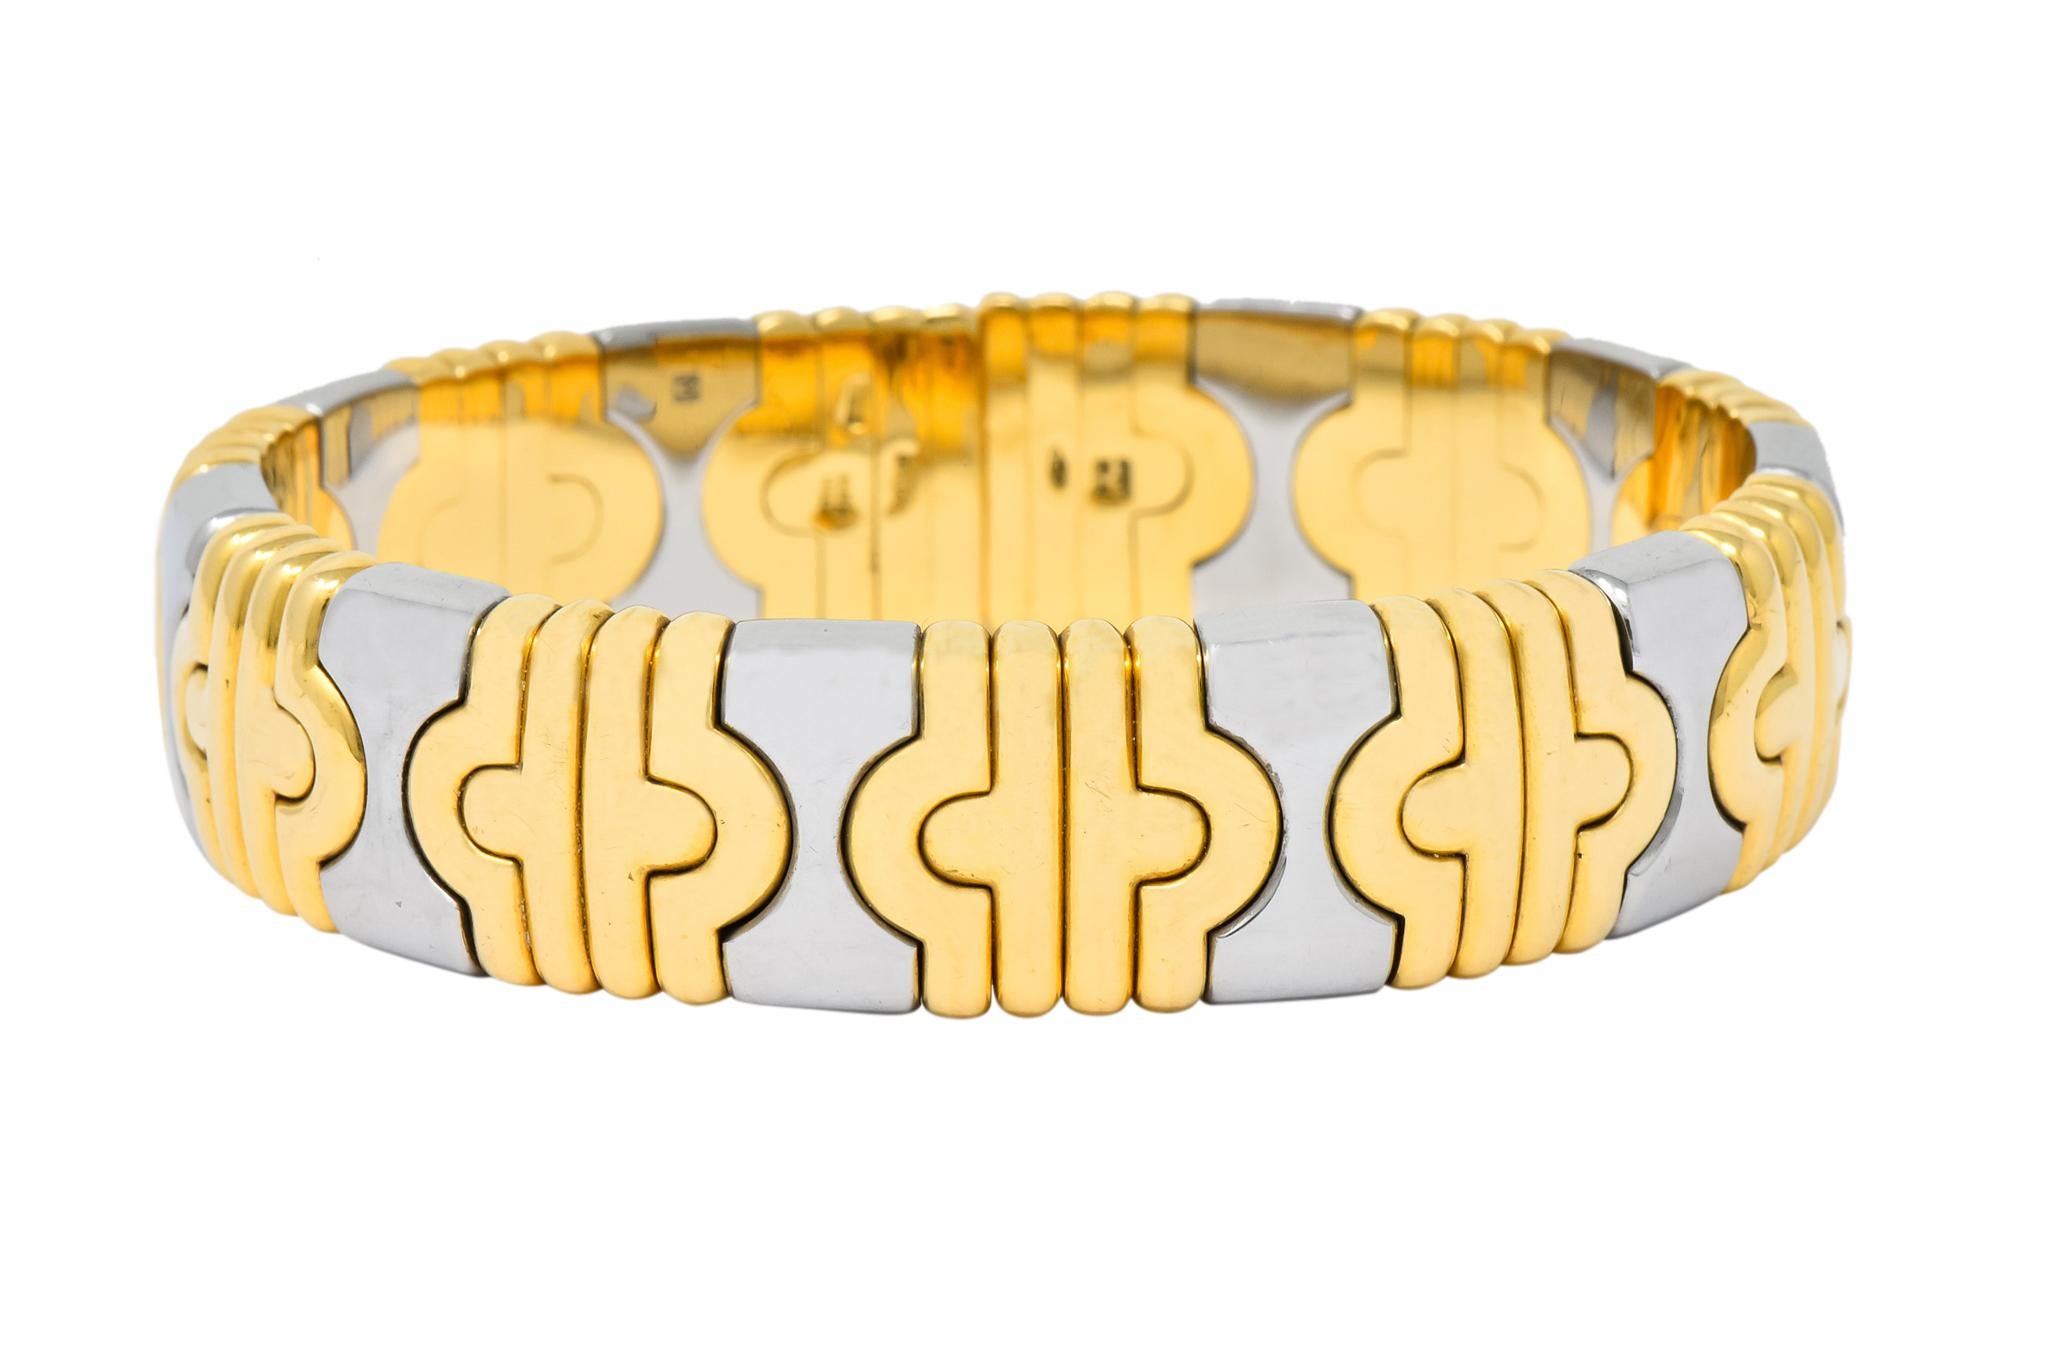 Cuff Bangle bracelet made with tubogas technology in the Or Et Acier style

Comprised of polished gold links in a ribbed geometric motif alternating with polished stainless steel links
 in an hour glass motif

From Bulgari's Parentesi